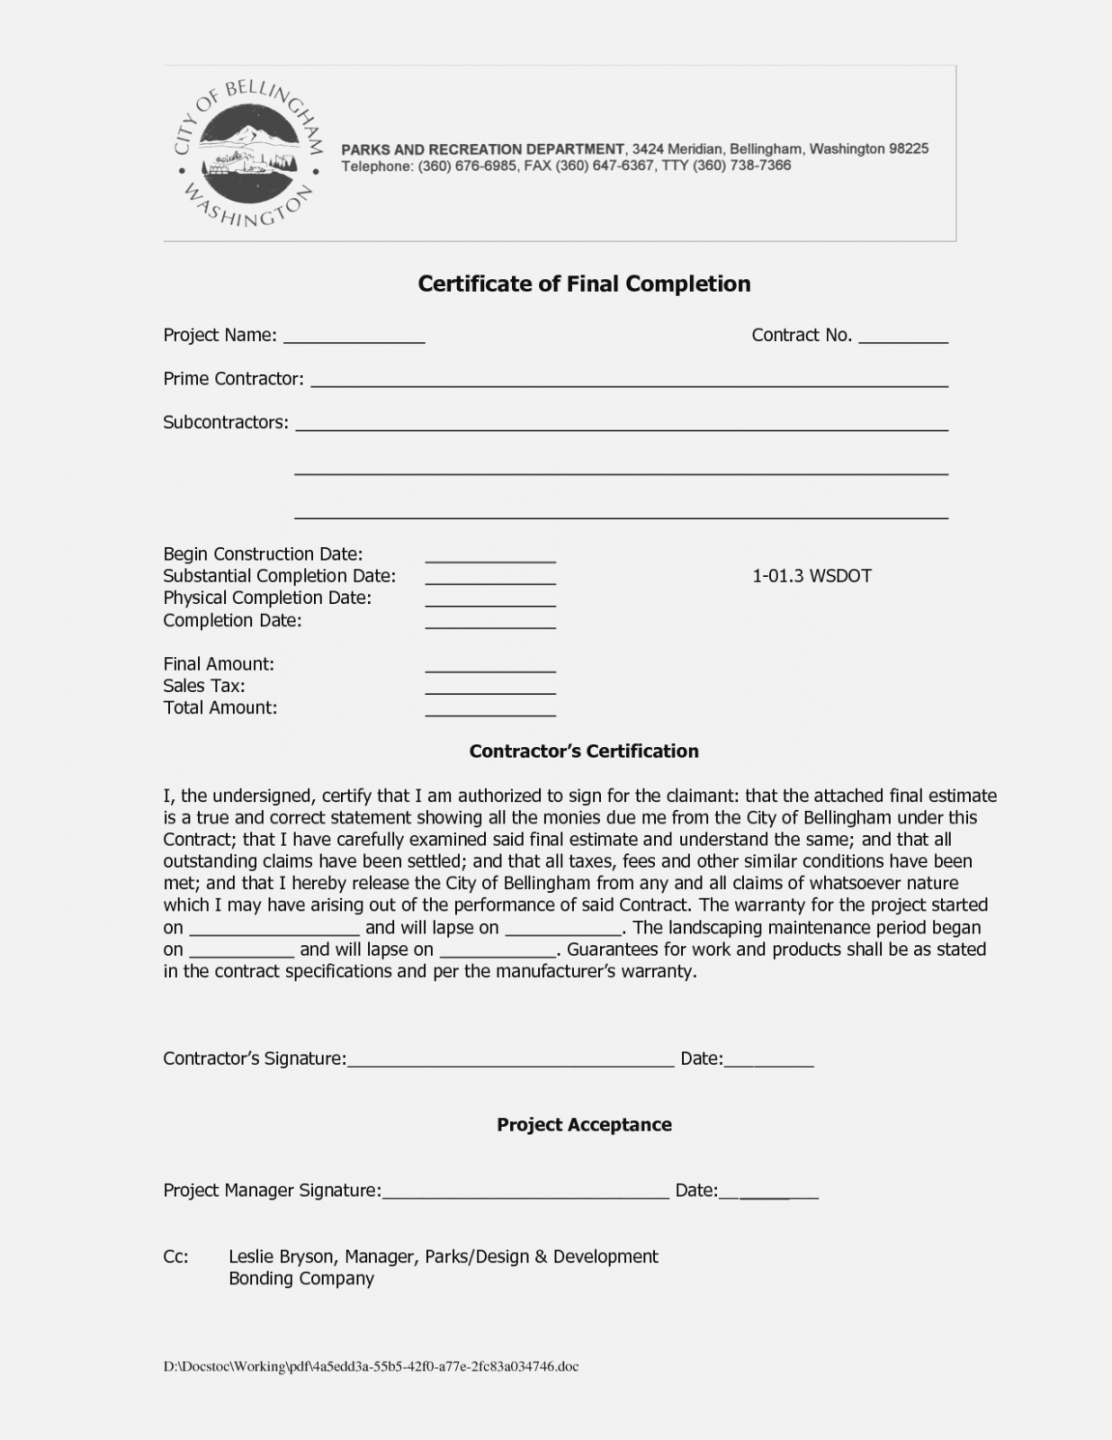 Roofing Certificate Of Completion Template Throughout Roof Certification Template